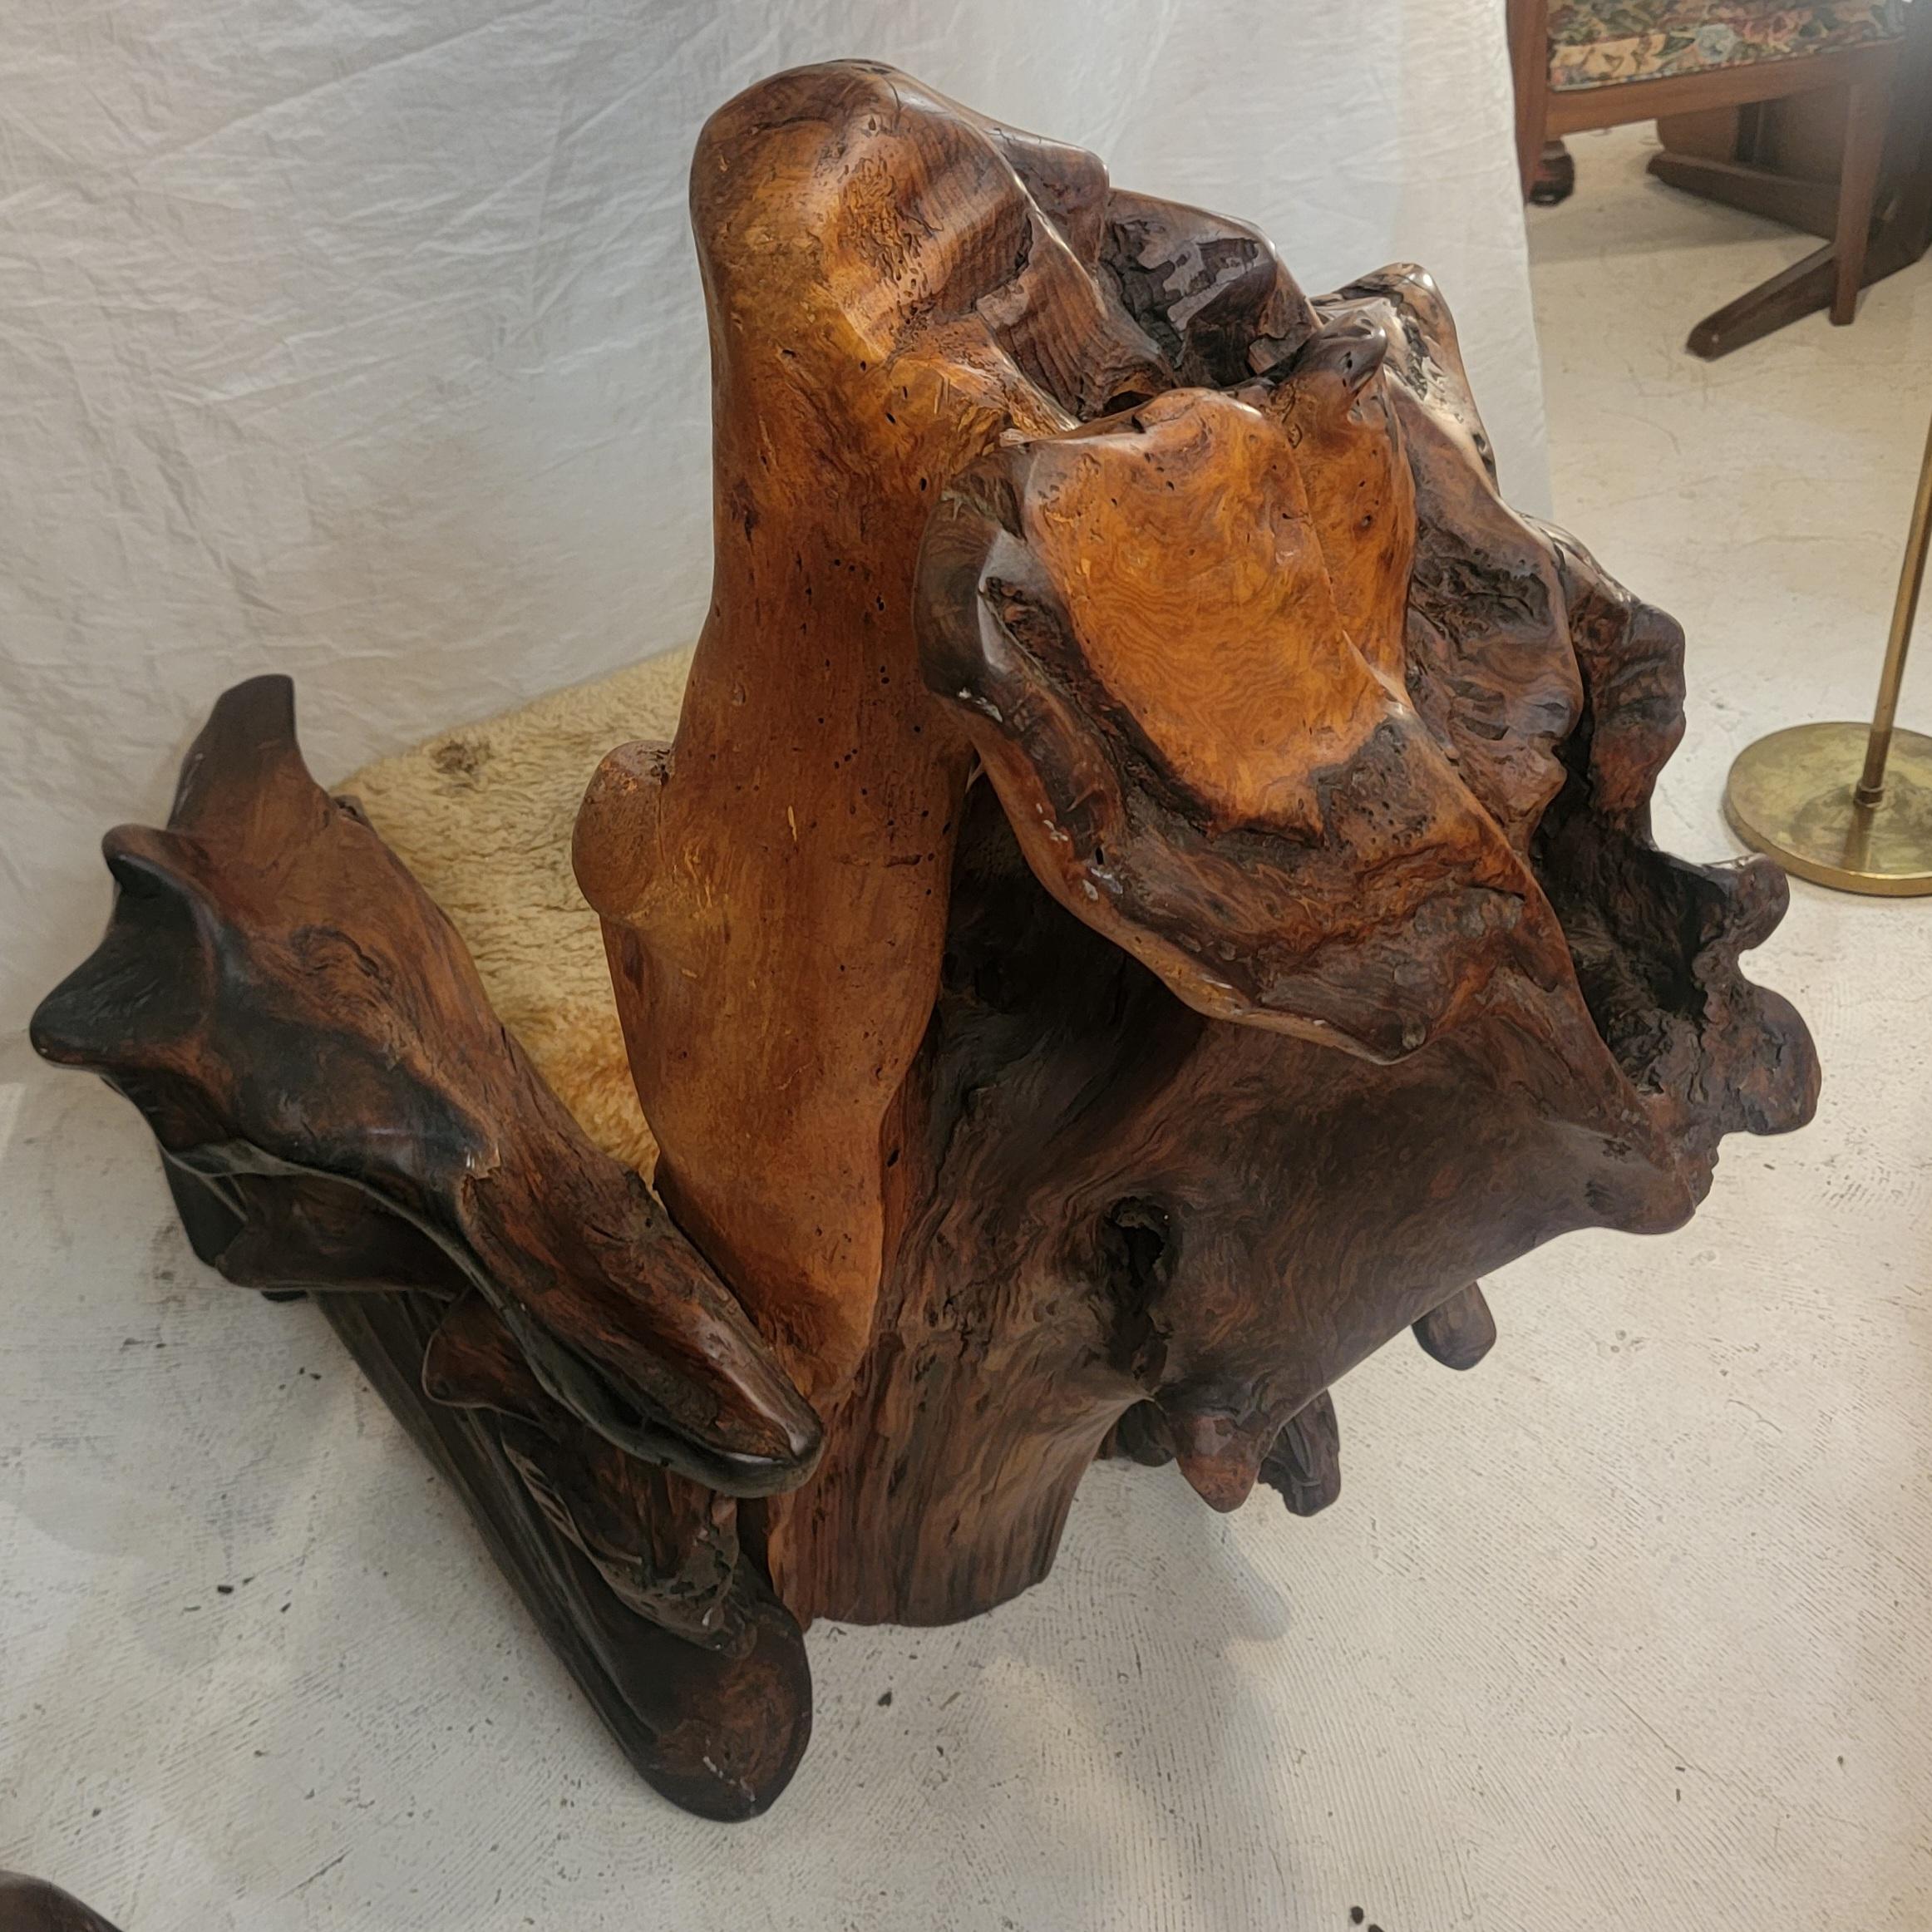 Vintage Free Form Slab Redwood Lounge Chair  Sheep Skin. Great formed burl root wood in large slabs. 

1960s measures approx - 44d x 40w x 48h x 15 seat height
